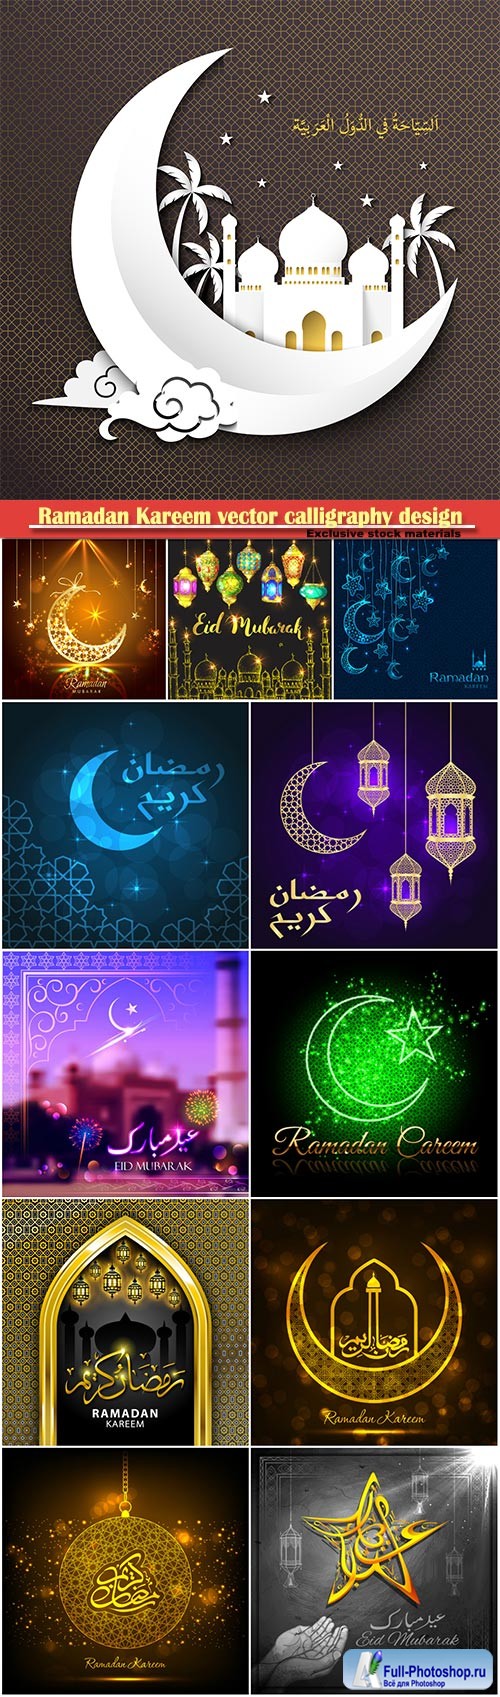 Ramadan Kareem vector calligraphy design with decorative floral pattern, mosque silhouette, crescent and glittering islamic background # 20